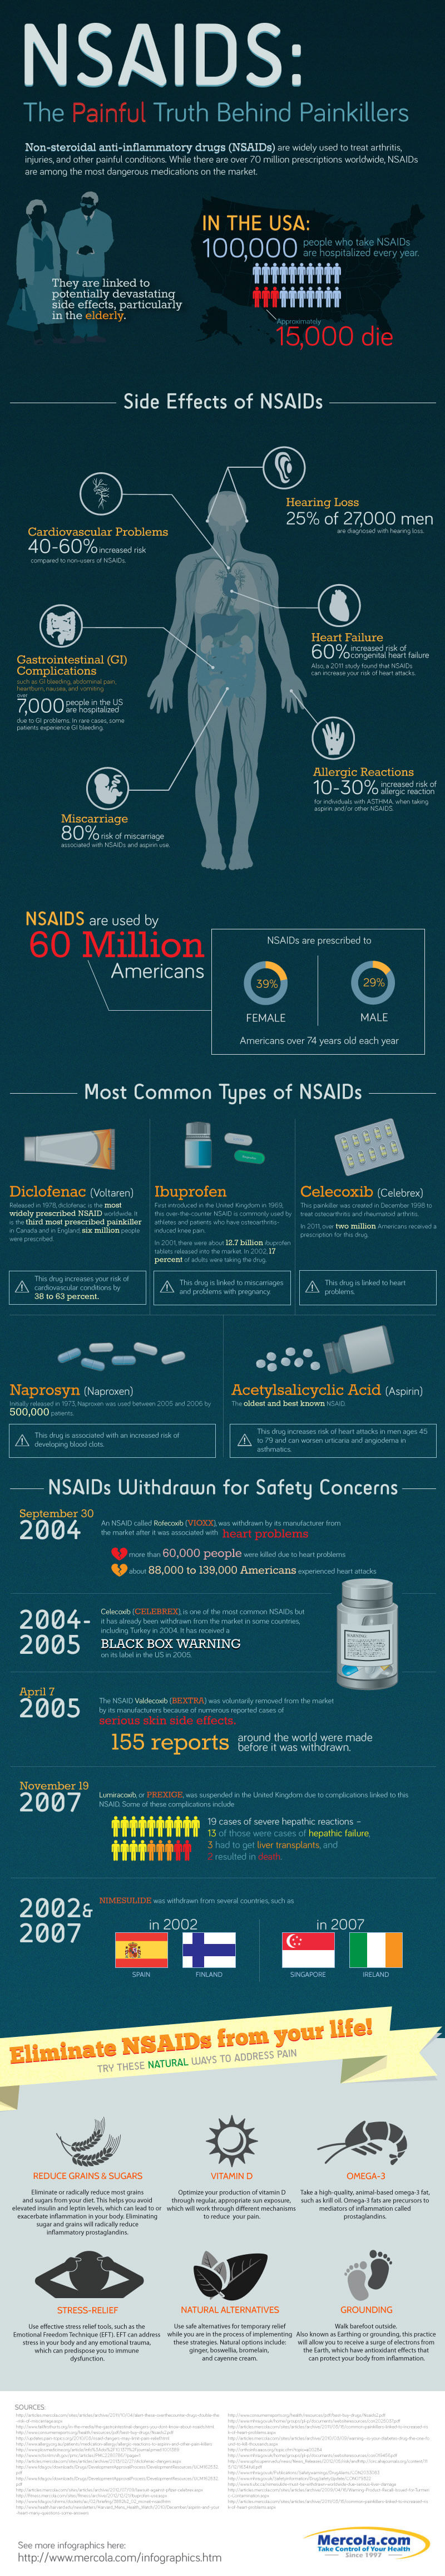 NSAIDS: The Painful Truth Behind Painkillers Infographic